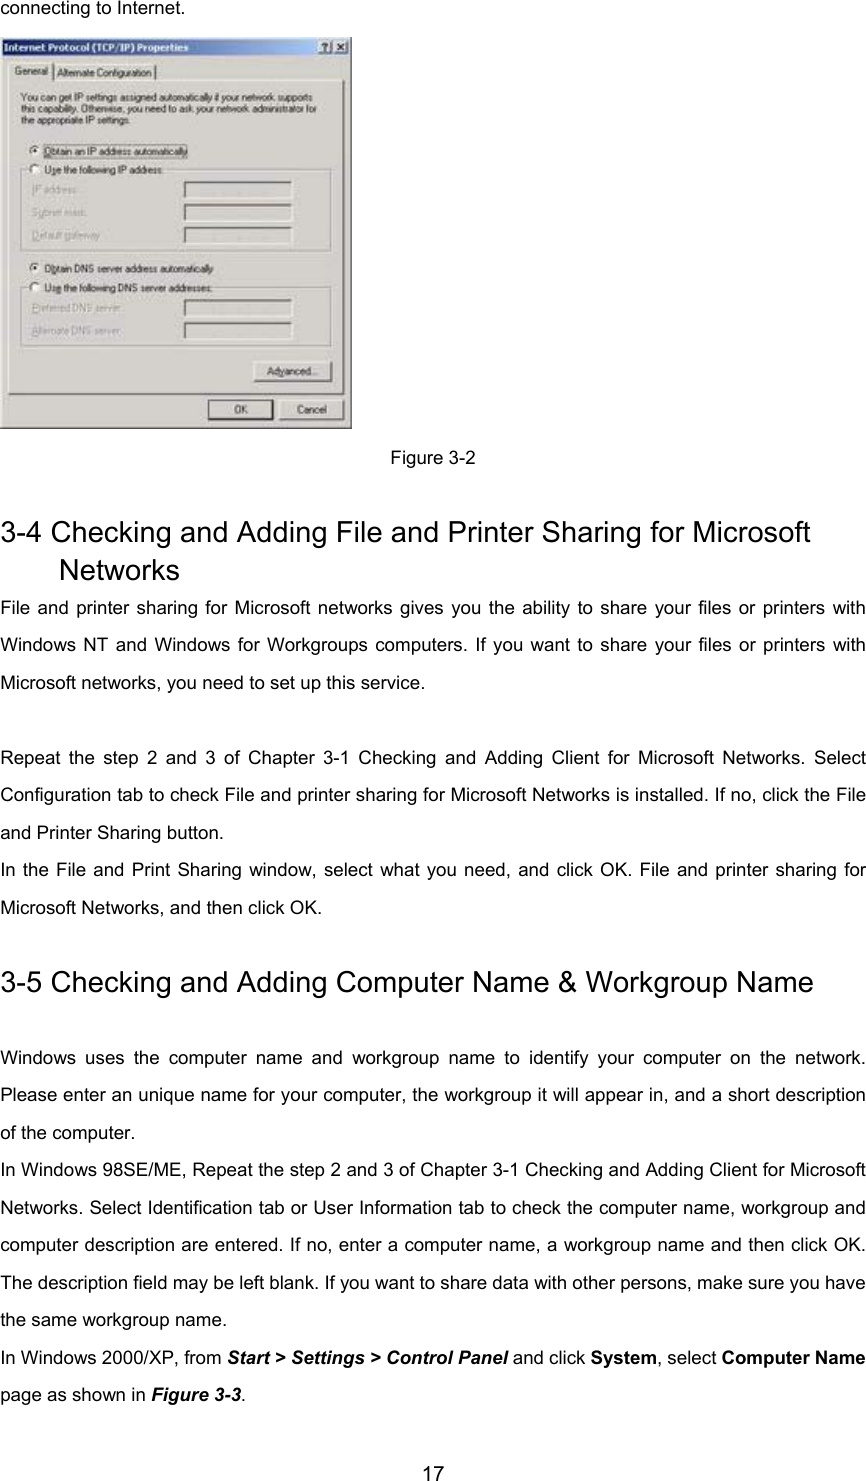 17connecting to Internet.Figure 3-23-4 Checking and Adding File and Printer Sharing for Microsoft NetworksFile and printer sharing for Microsoft networks gives you the ability to share your files or printers withWindows NT and Windows for Workgroups computers. If you want to share your files or printers withMicrosoft networks, you need to set up this service.Repeat the step 2 and 3 of Chapter 3-1 Checking and Adding Client for Microsoft Networks. SelectConfiguration tab to check File and printer sharing for Microsoft Networks is installed. If no, click the Fileand Printer Sharing button.In the File and Print Sharing window, select what you need, and click OK. File and printer sharing forMicrosoft Networks, and then click OK.3-5 Checking and Adding Computer Name &amp; Workgroup NameWindows uses the computer name and workgroup name to identify your computer on the network.Please enter an unique name for your computer, the workgroup it will appear in, and a short descriptionof the computer.In Windows 98SE/ME, Repeat the step 2 and 3 of Chapter 3-1 Checking and Adding Client for MicrosoftNetworks. Select Identification tab or User Information tab to check the computer name, workgroup andcomputer description are entered. If no, enter a computer name, a workgroup name and then click OK.The description field may be left blank. If you want to share data with other persons, make sure you havethe same workgroup name.In Windows 2000/XP, from Start &gt; Settings &gt; Control Panel and click System, select Computer Namepage as shown in Figure 3-3.